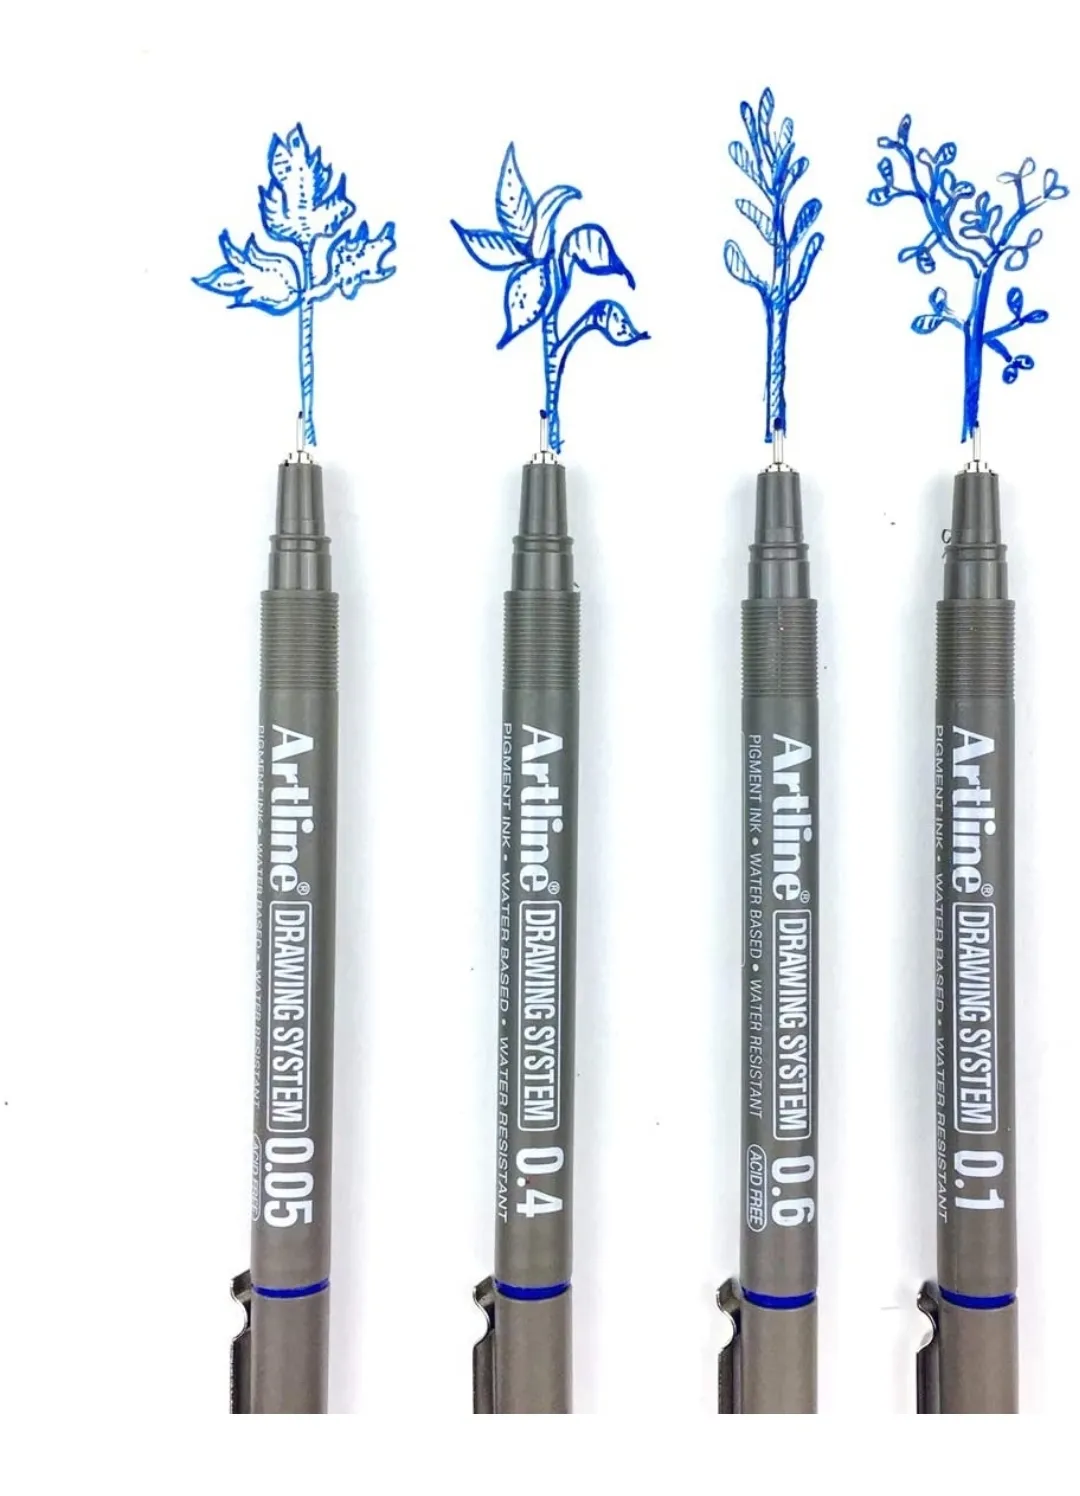 Artline Drawing System Artistic Technical Pen 0.5 mm Point Size Pack of 1